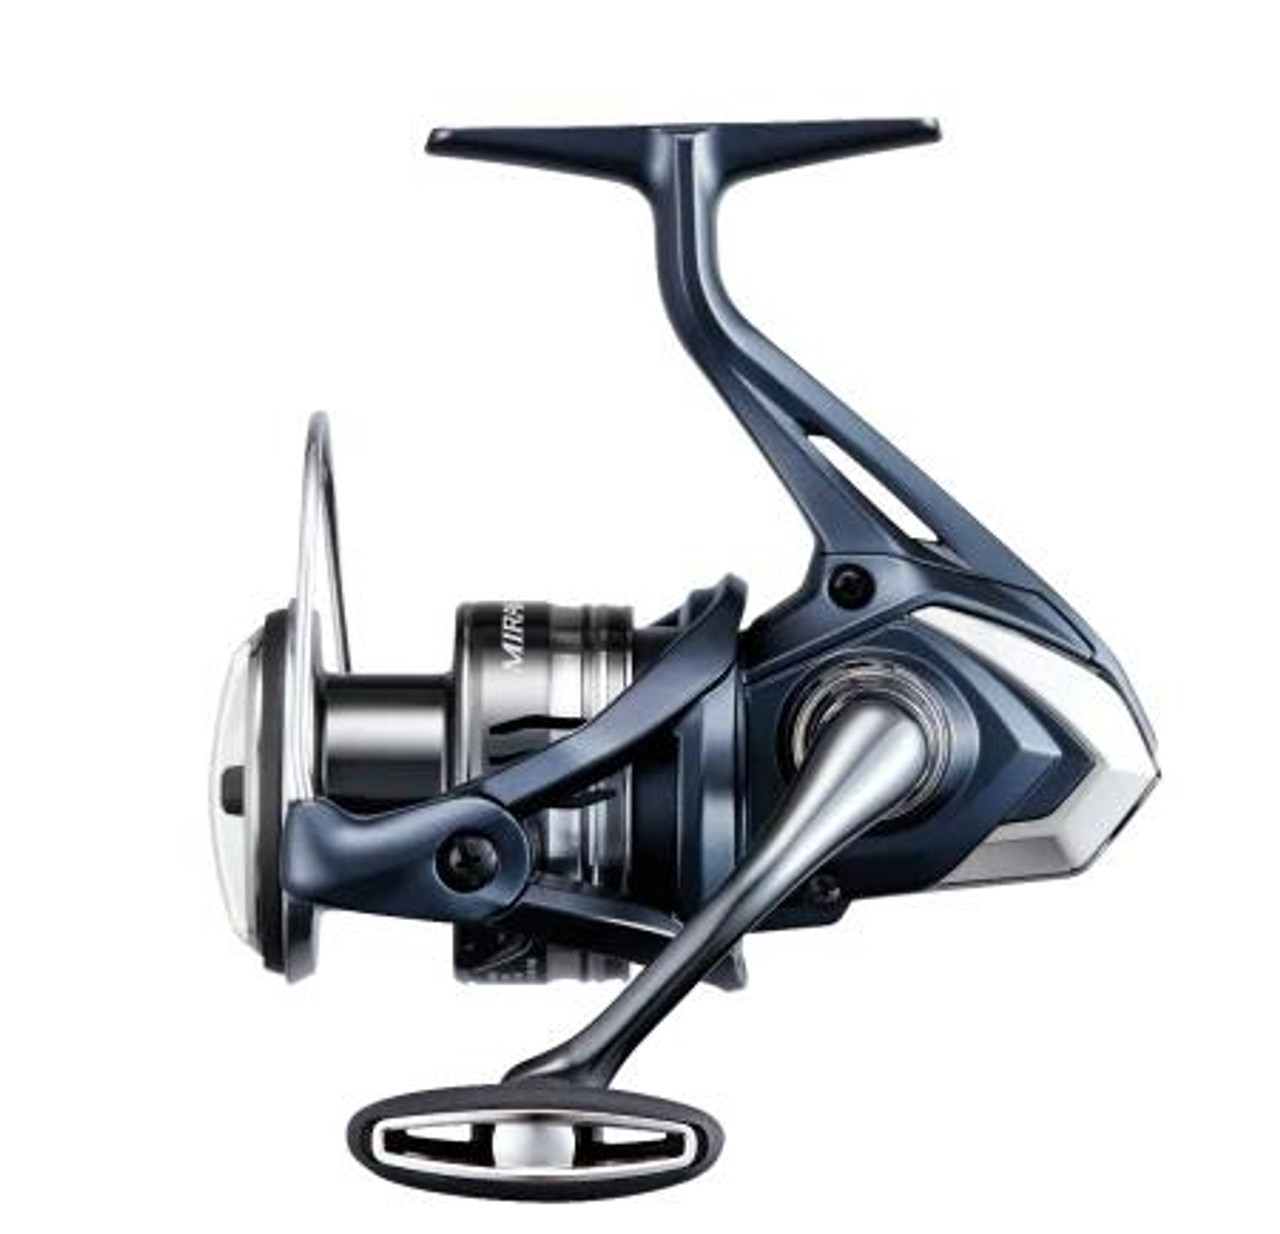 https://cdn11.bigcommerce.com/s-0xmhwue6/images/stencil/1280x1280/products/22737/50239/Shimano-Miravel-Spinning-Reel-3000-6-2-1-022255269223_image1__82141.1668794937.jpg?c=2